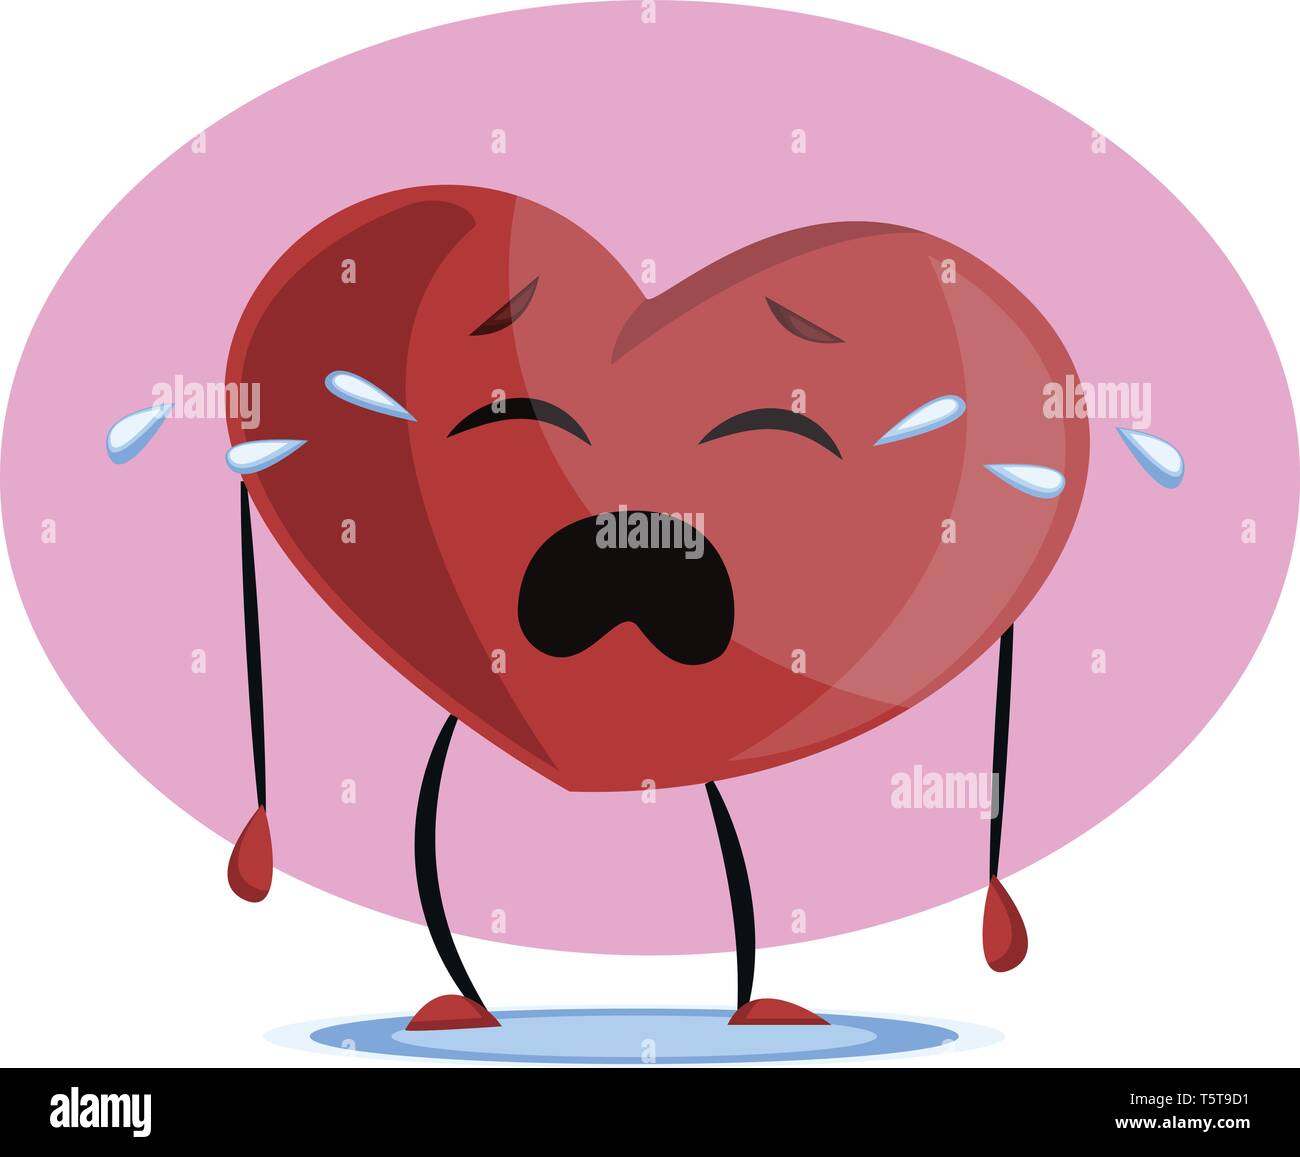 Big red heart crying vector illustration in violet circle on white background. Stock Vector